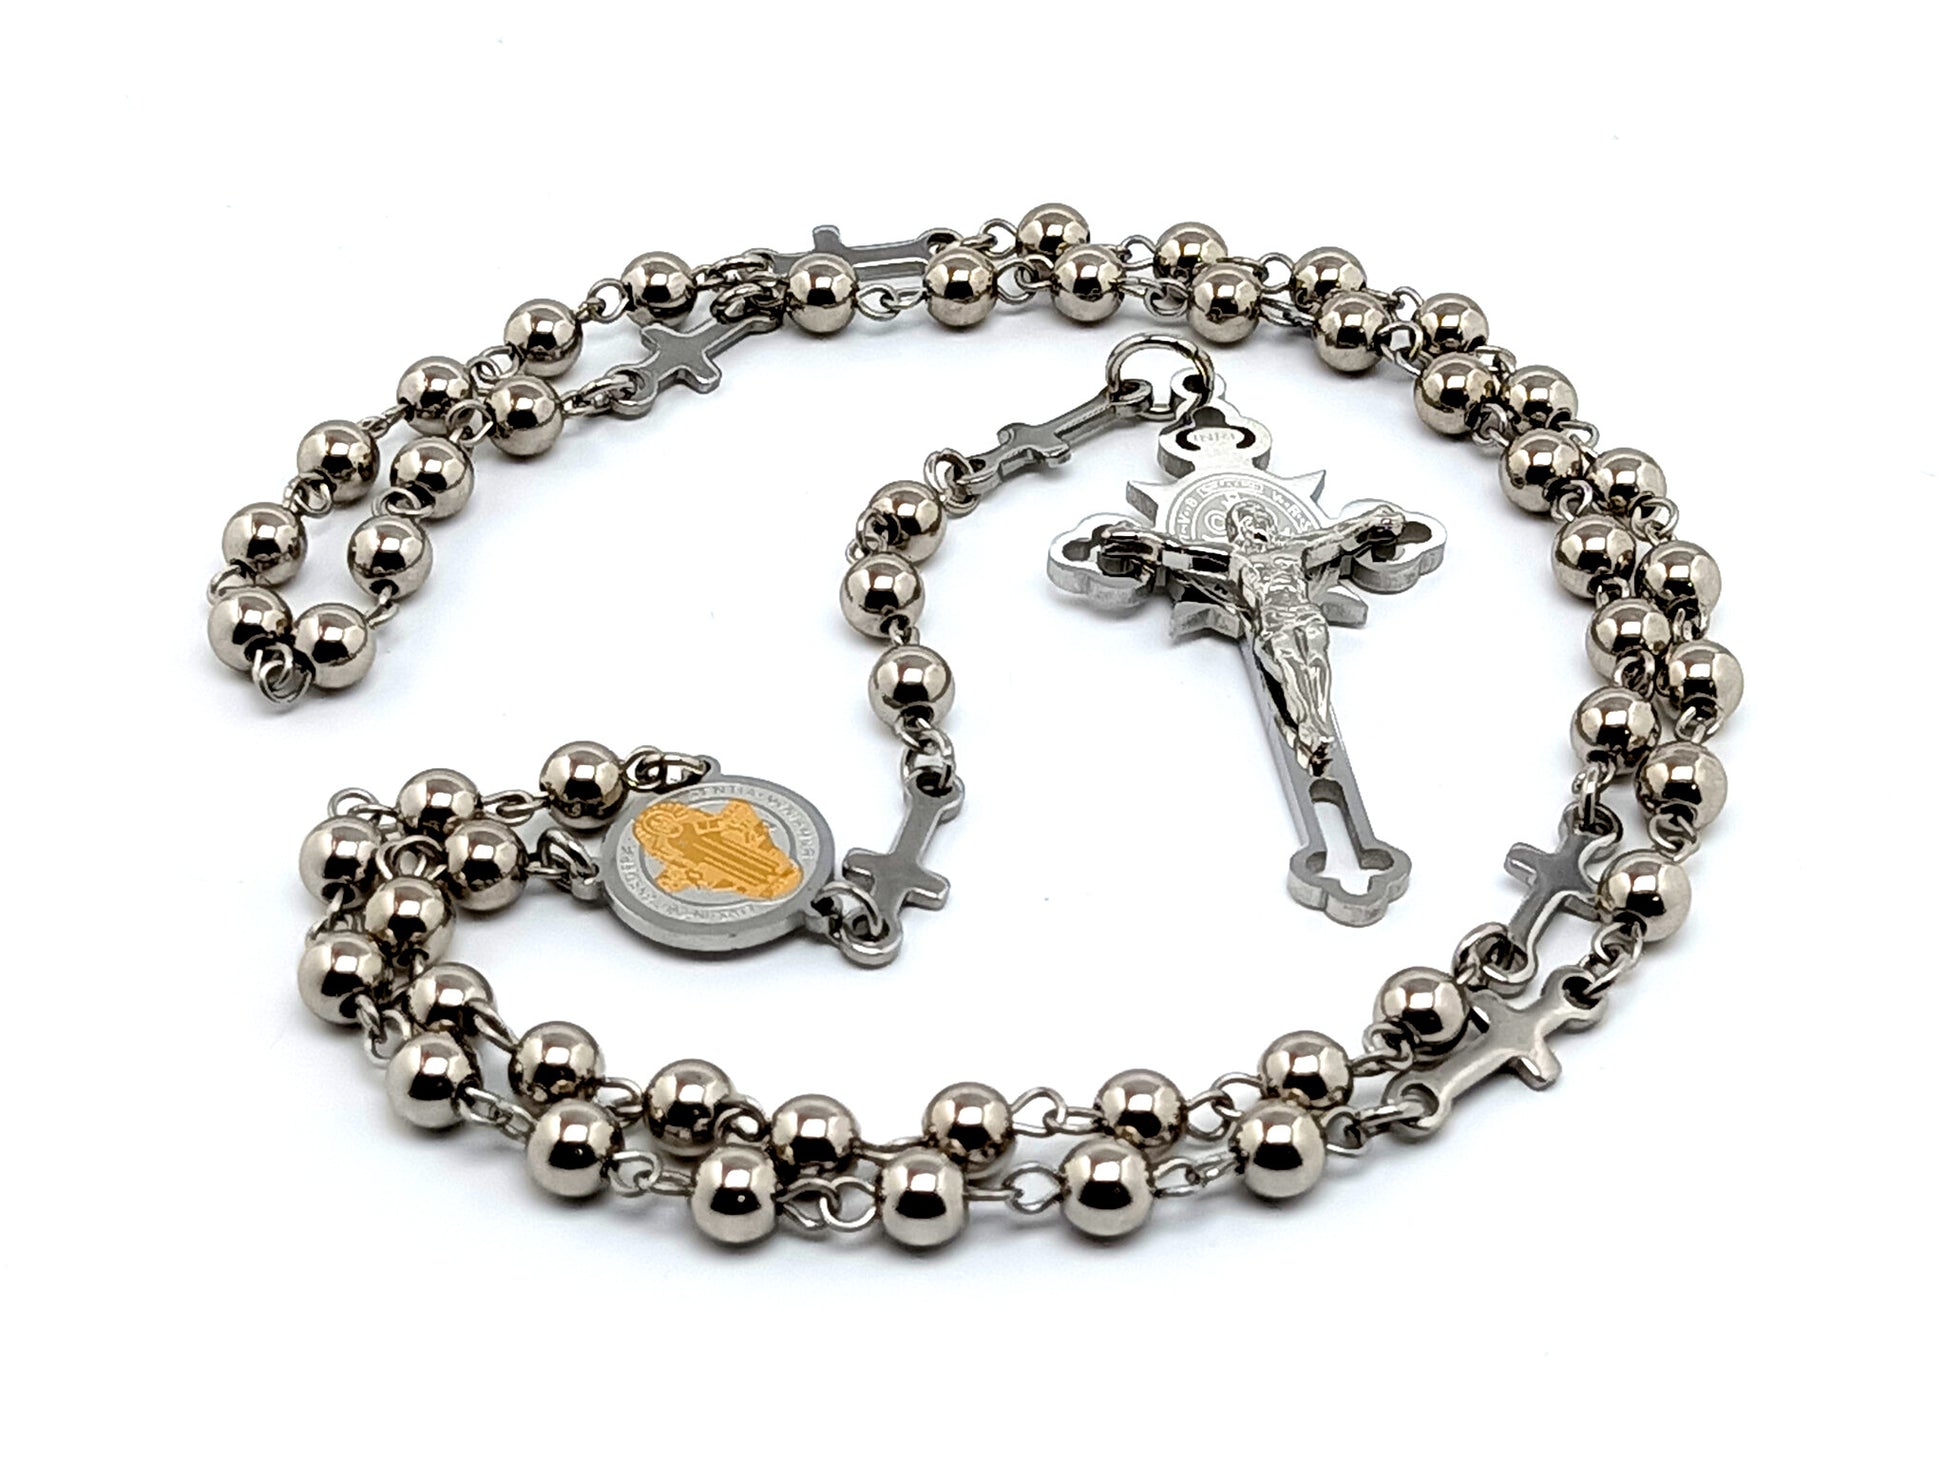 Saint Benedict unique rosary beads with stainless steel and linking cross beads and Saint Benedict stainless steel crucifix.